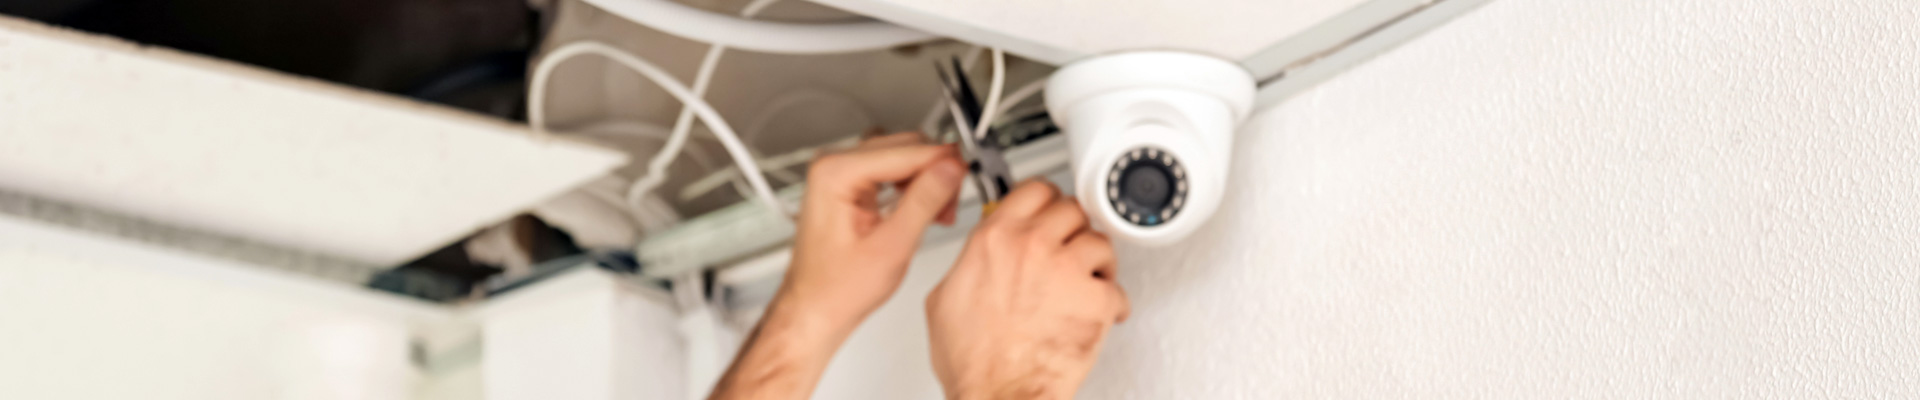 CCTV and Security Camera Installation Electrician- Brisbane